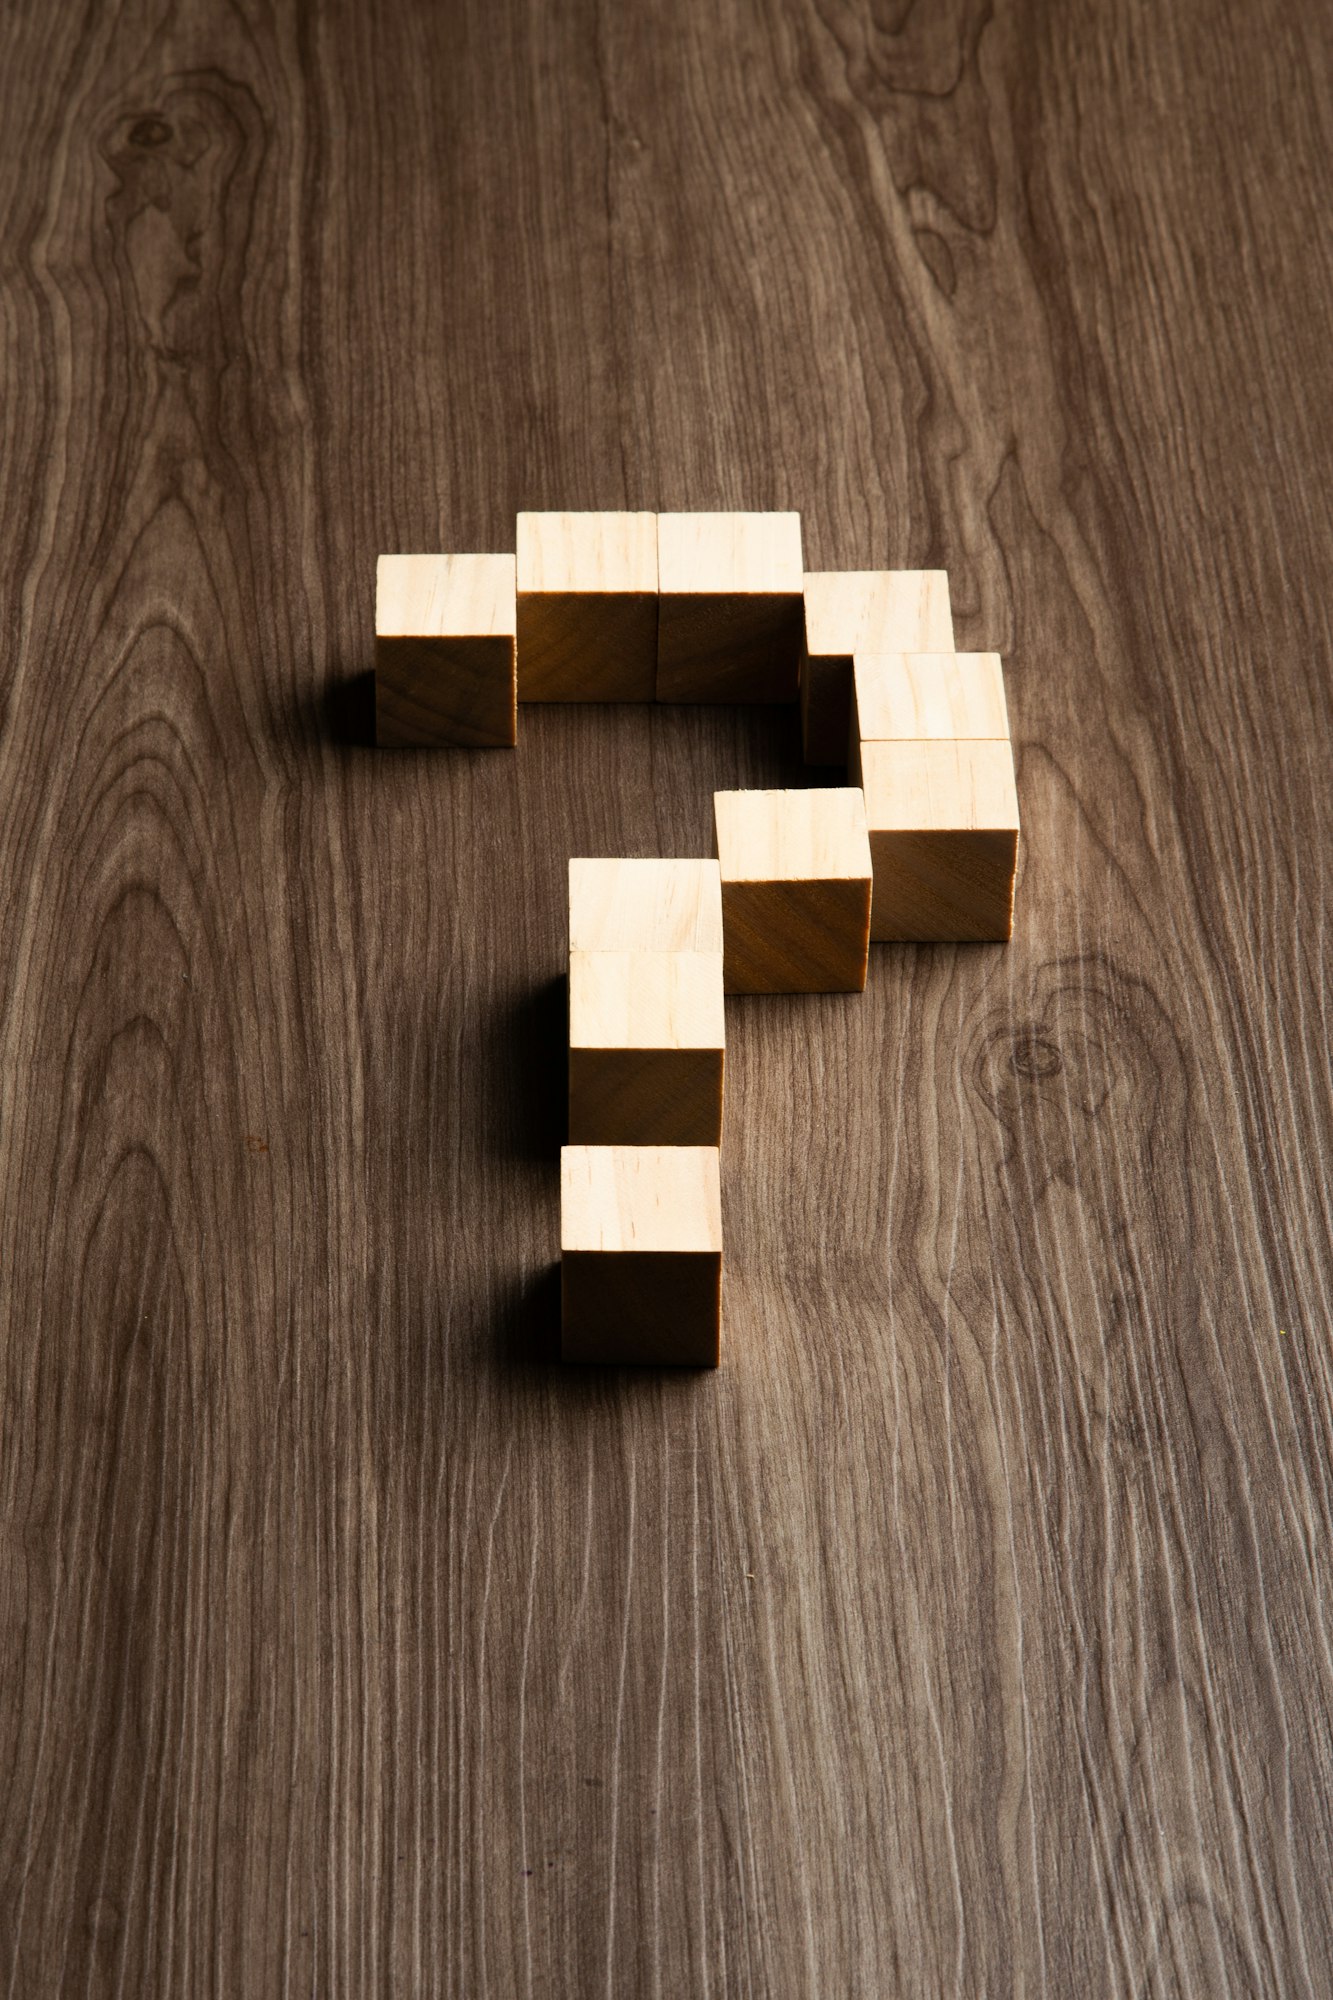 Forming bigger question mark. question mark on wooden table background